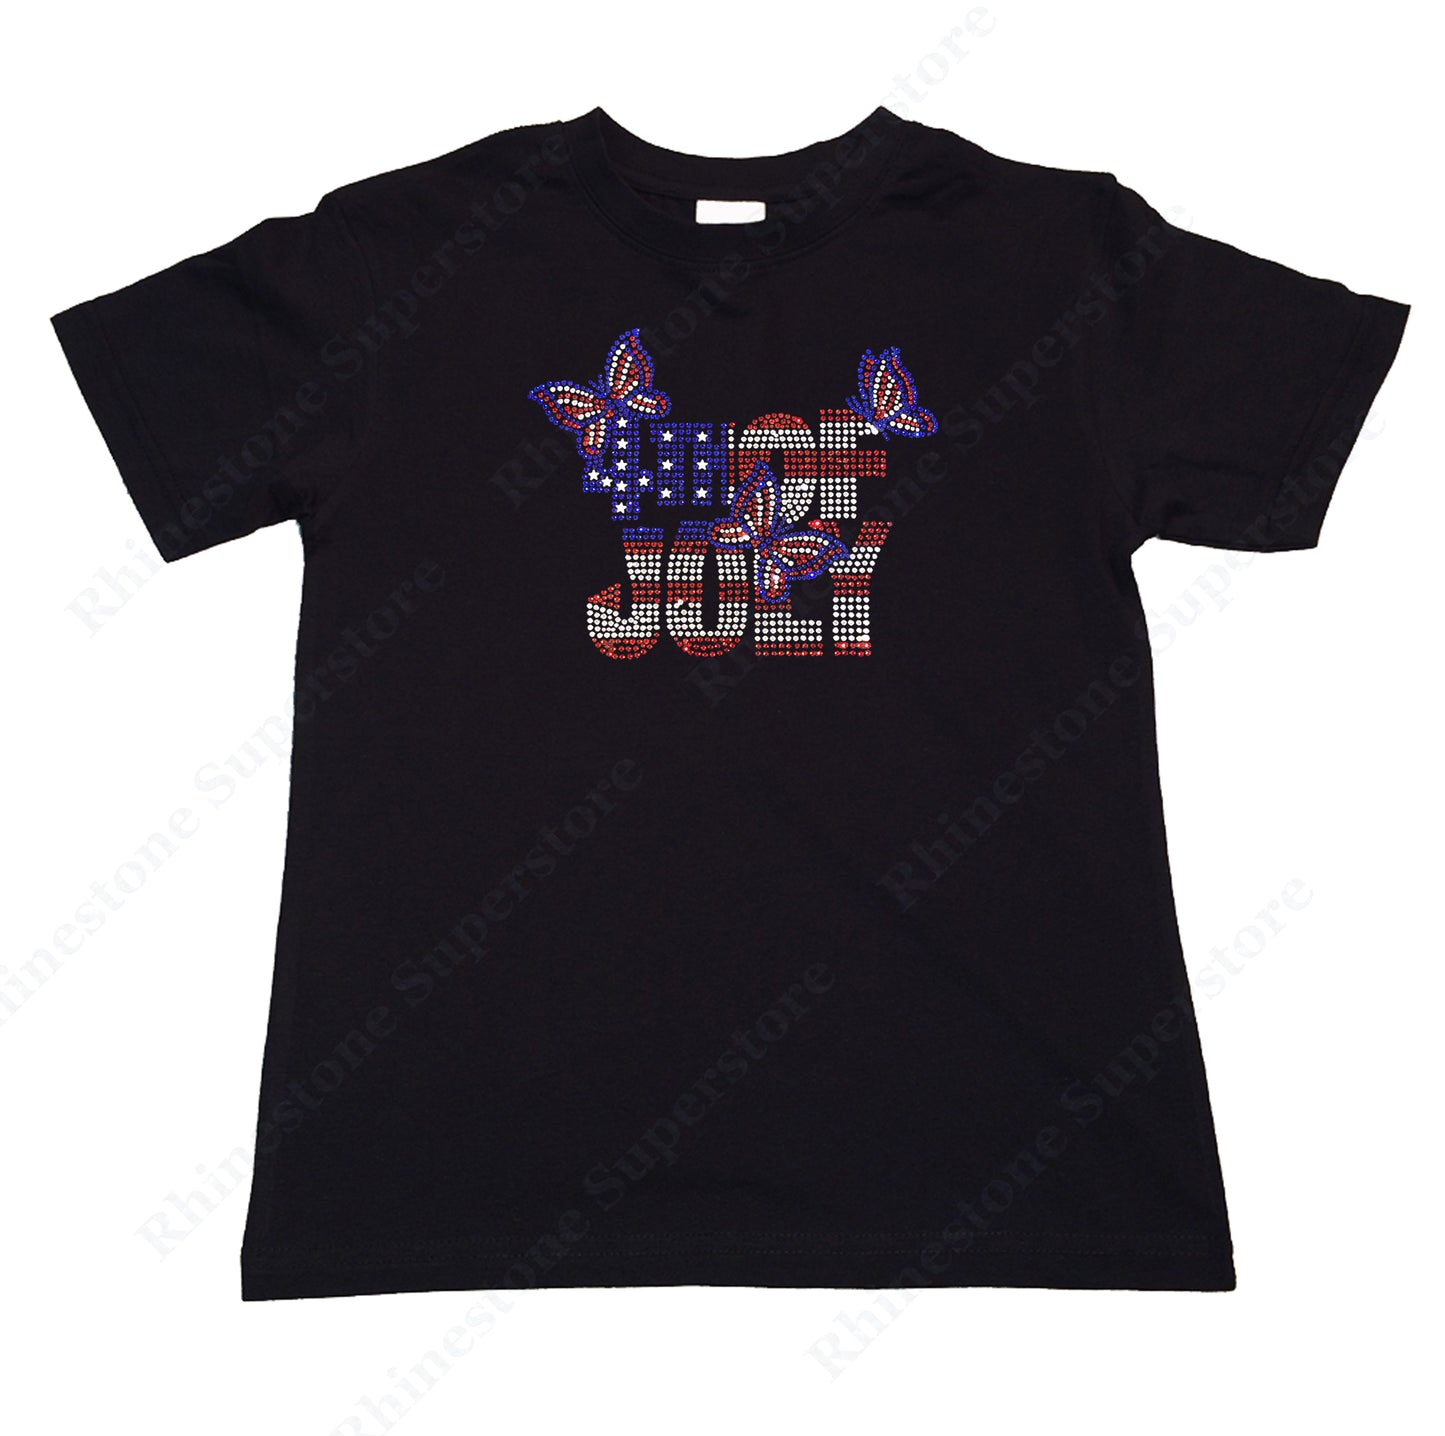 Girls Rhinestone T-Shirt " 4th of July with Butterflies in Rhinestones " Kids Size 3 to 14 Available